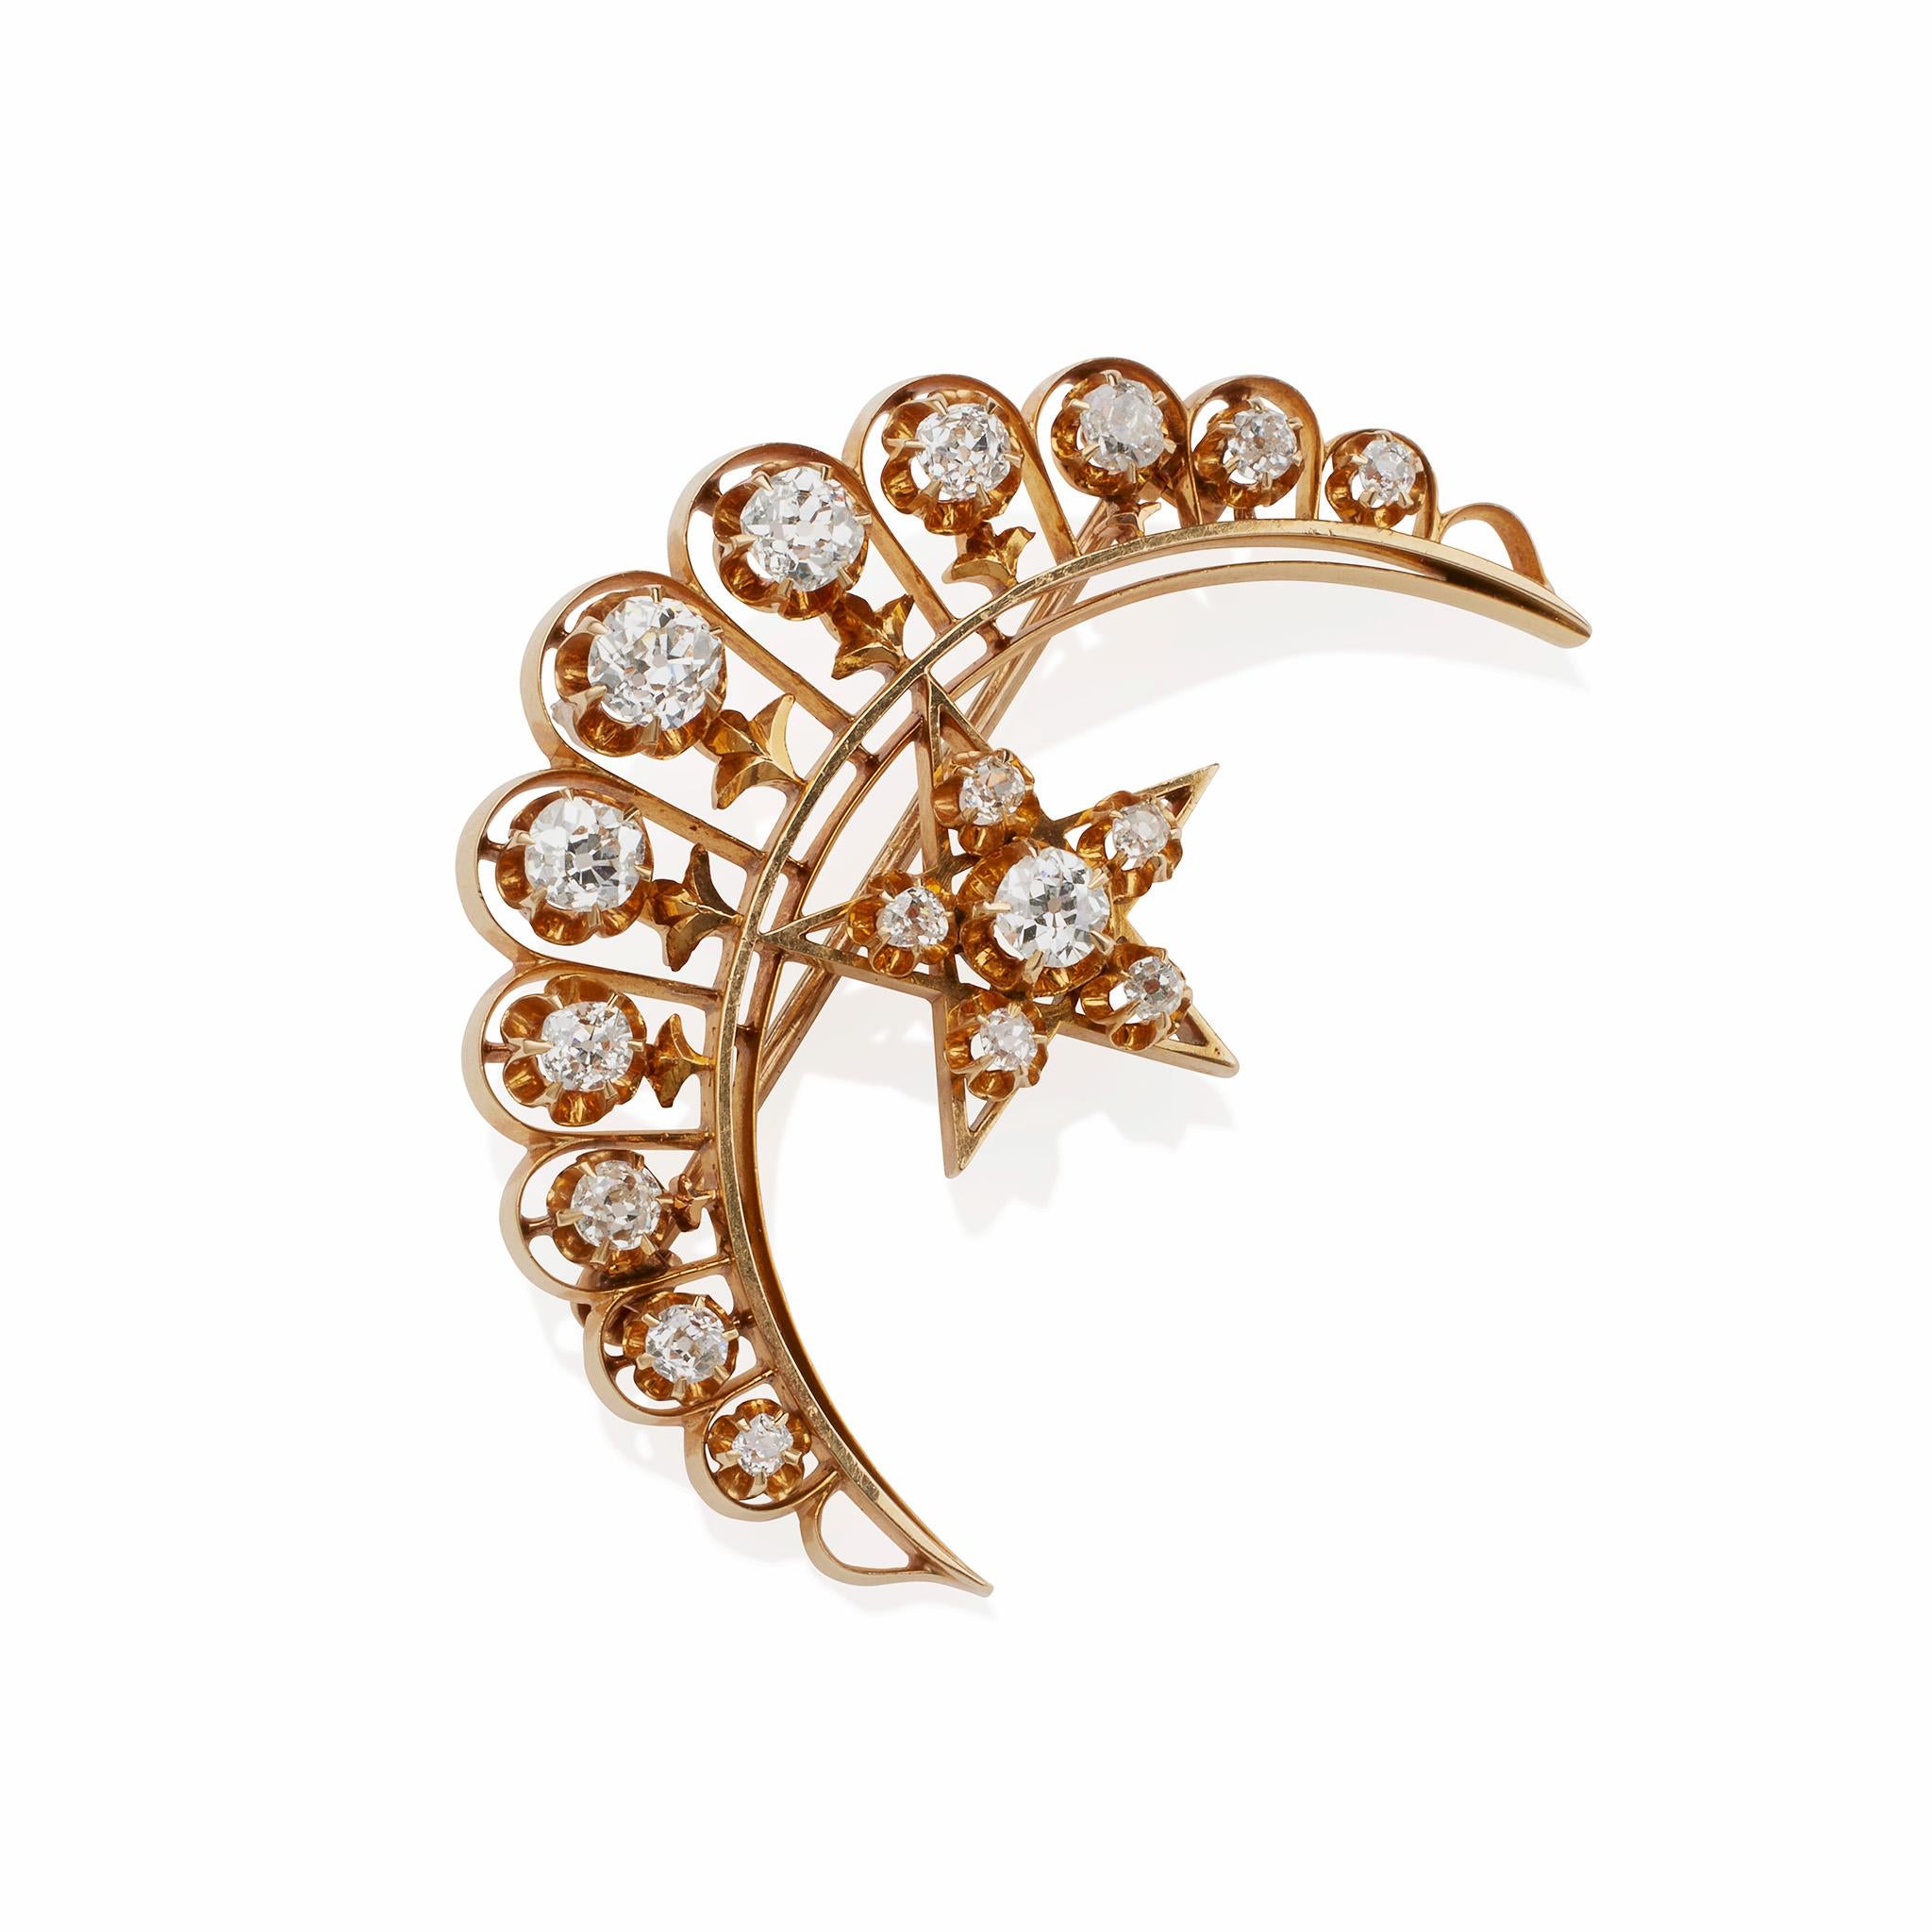 Created in the last years of the 19th century, this crescent and star brooch iin 18K gold s set with almost 2.50 carats of diamonds. The slender crecent is set with eleven graduating old mine-cut diamonds, off-set by a fice-pointed star set with six